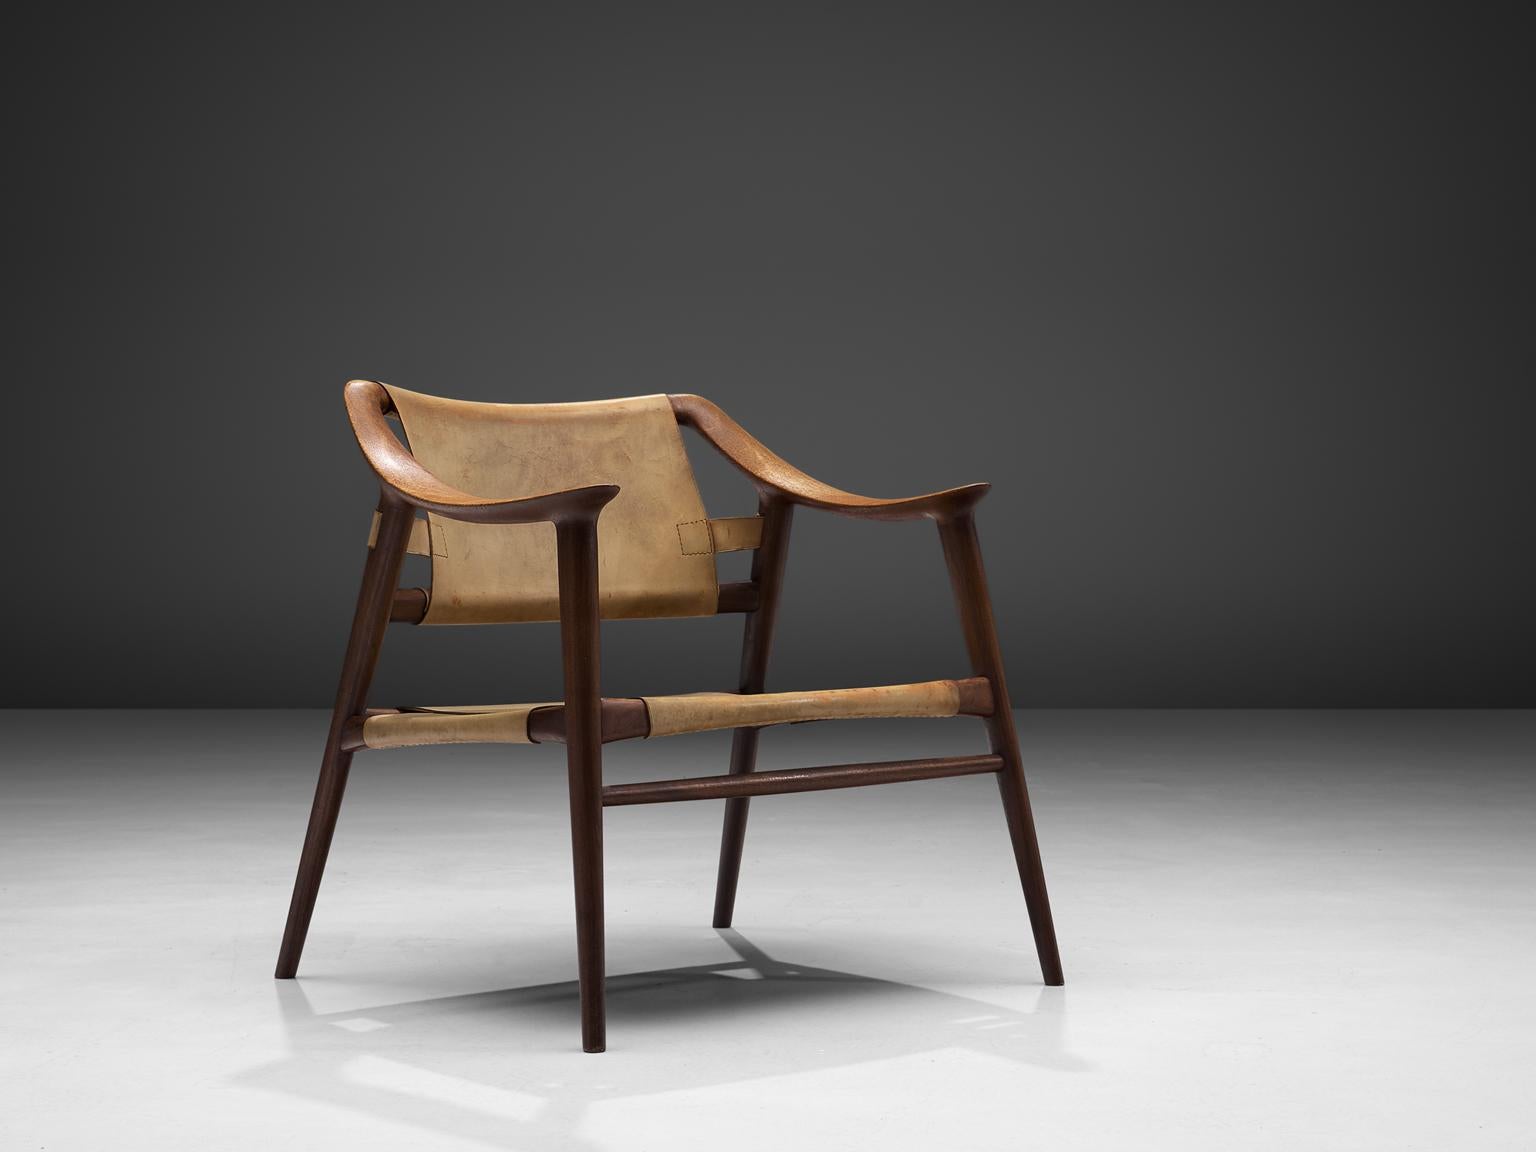 Rolf Rastad & Adolf Relling for Gustav Bahus set of 2 armchairs model 56/2 'Bambi', teak and leather, Norway, circa 1954. 

Excellent example of the 'Bambi' chair of Rolf Rastad and Adolf Reling. This edition consist of a teak frame and light